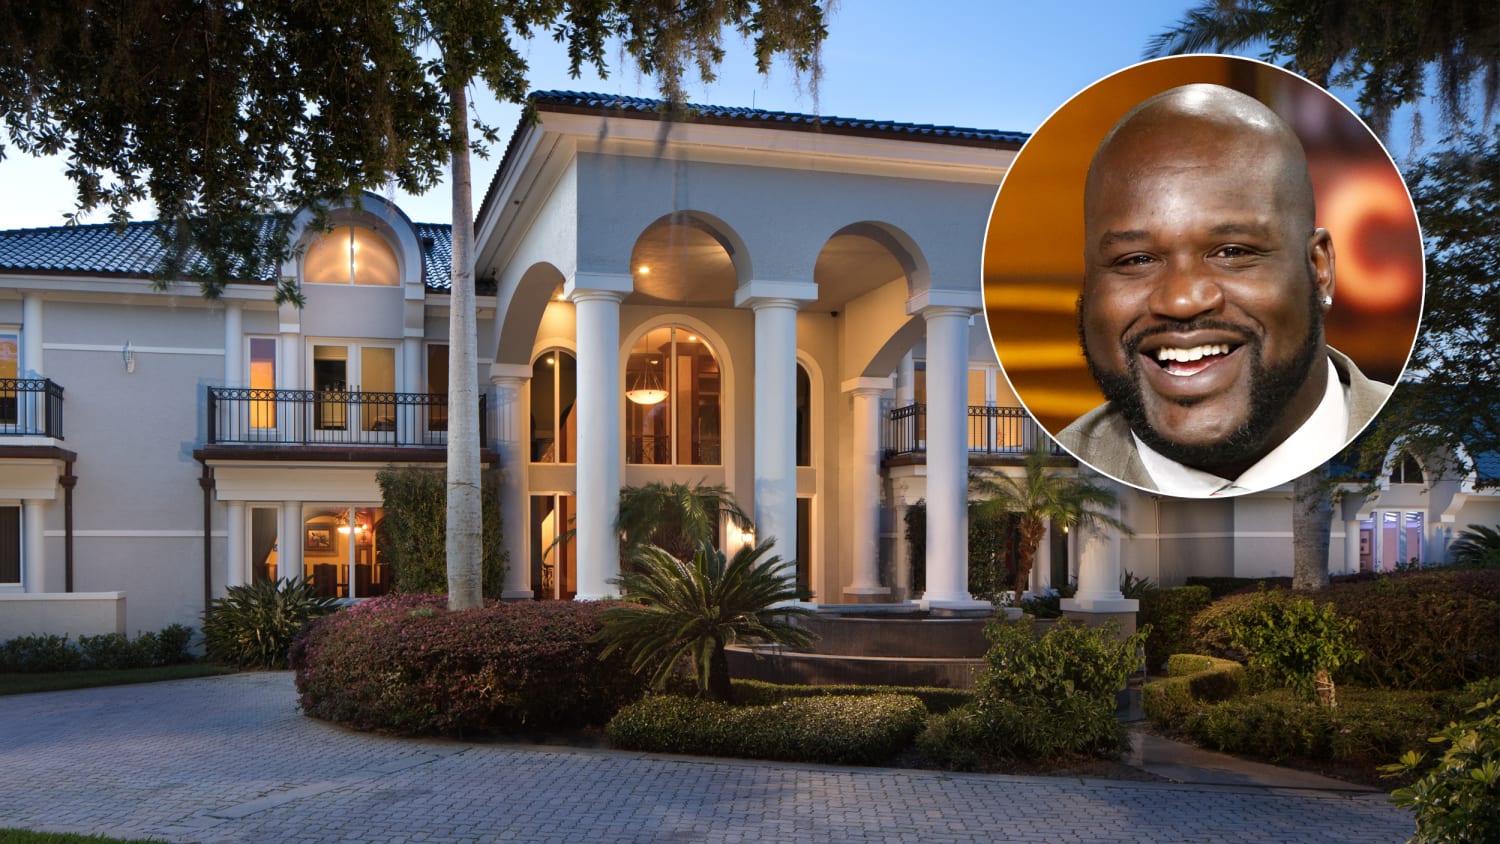 Shaquille O'Neal buys Las Vegas home, Housing